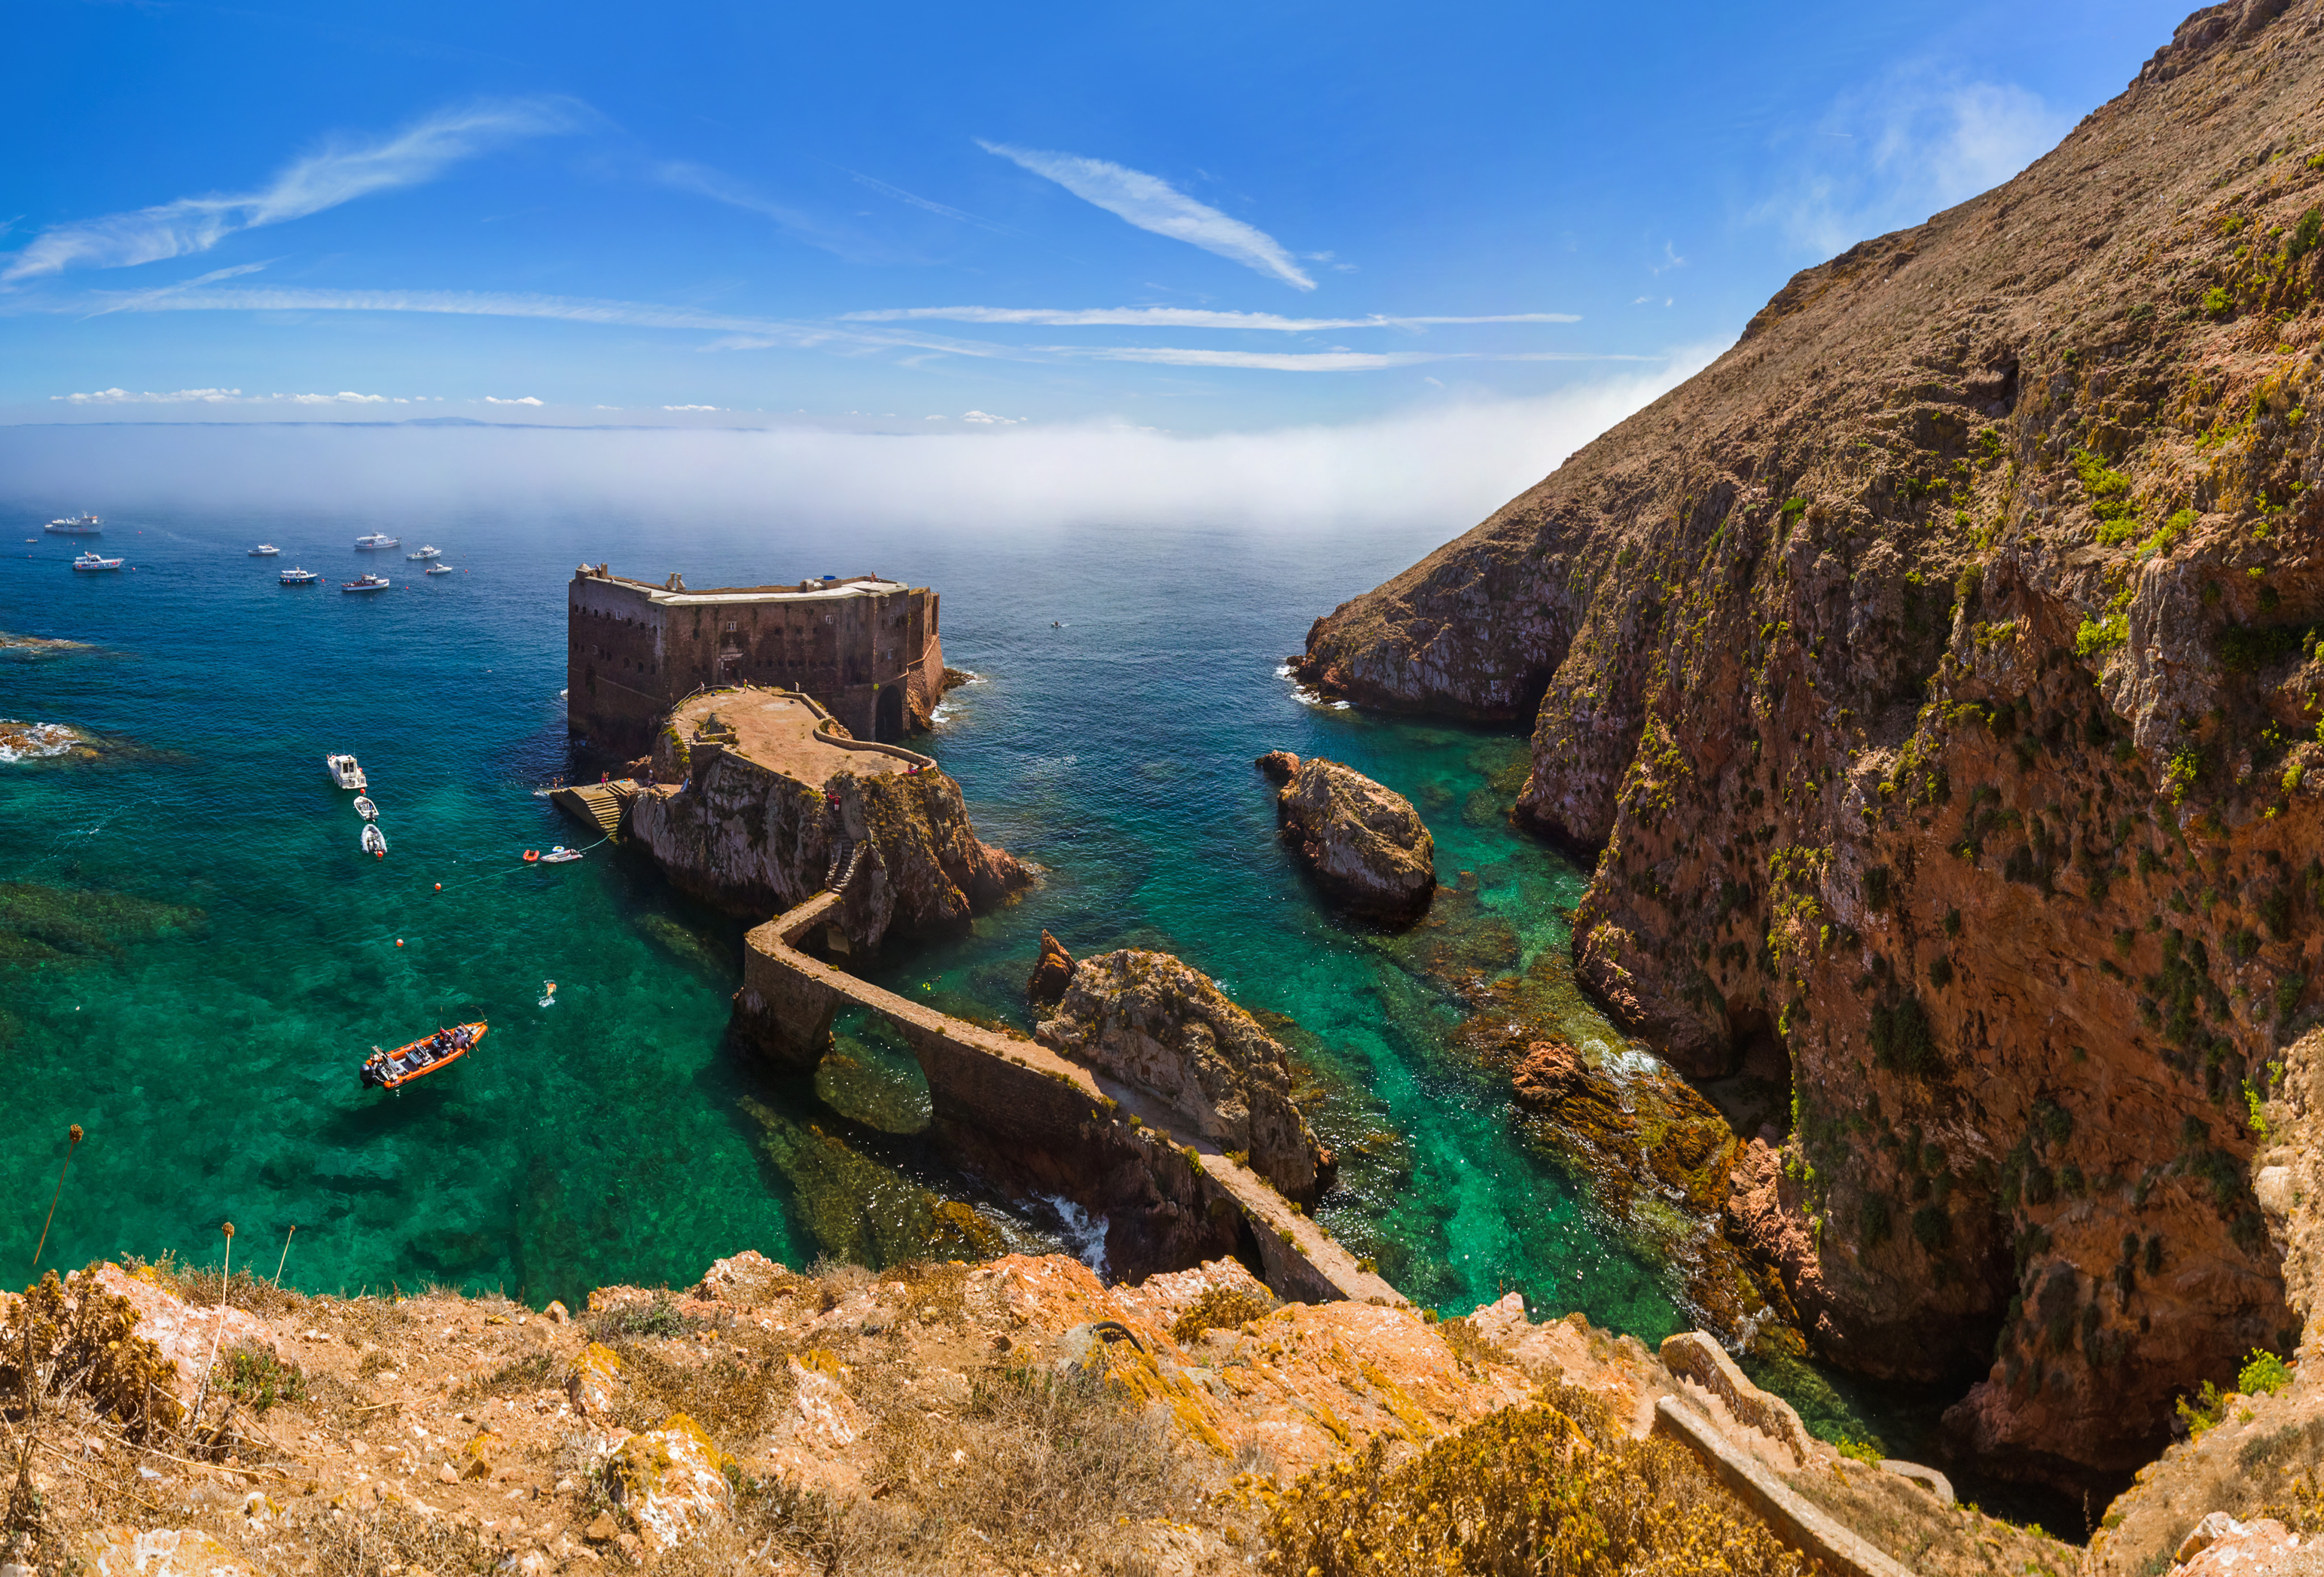 The 17th-century fort on Berlenga island in Portugal is one of many hidden gems to be discovered on a trip around the quieter parts of the country. Photo: Shutterstock